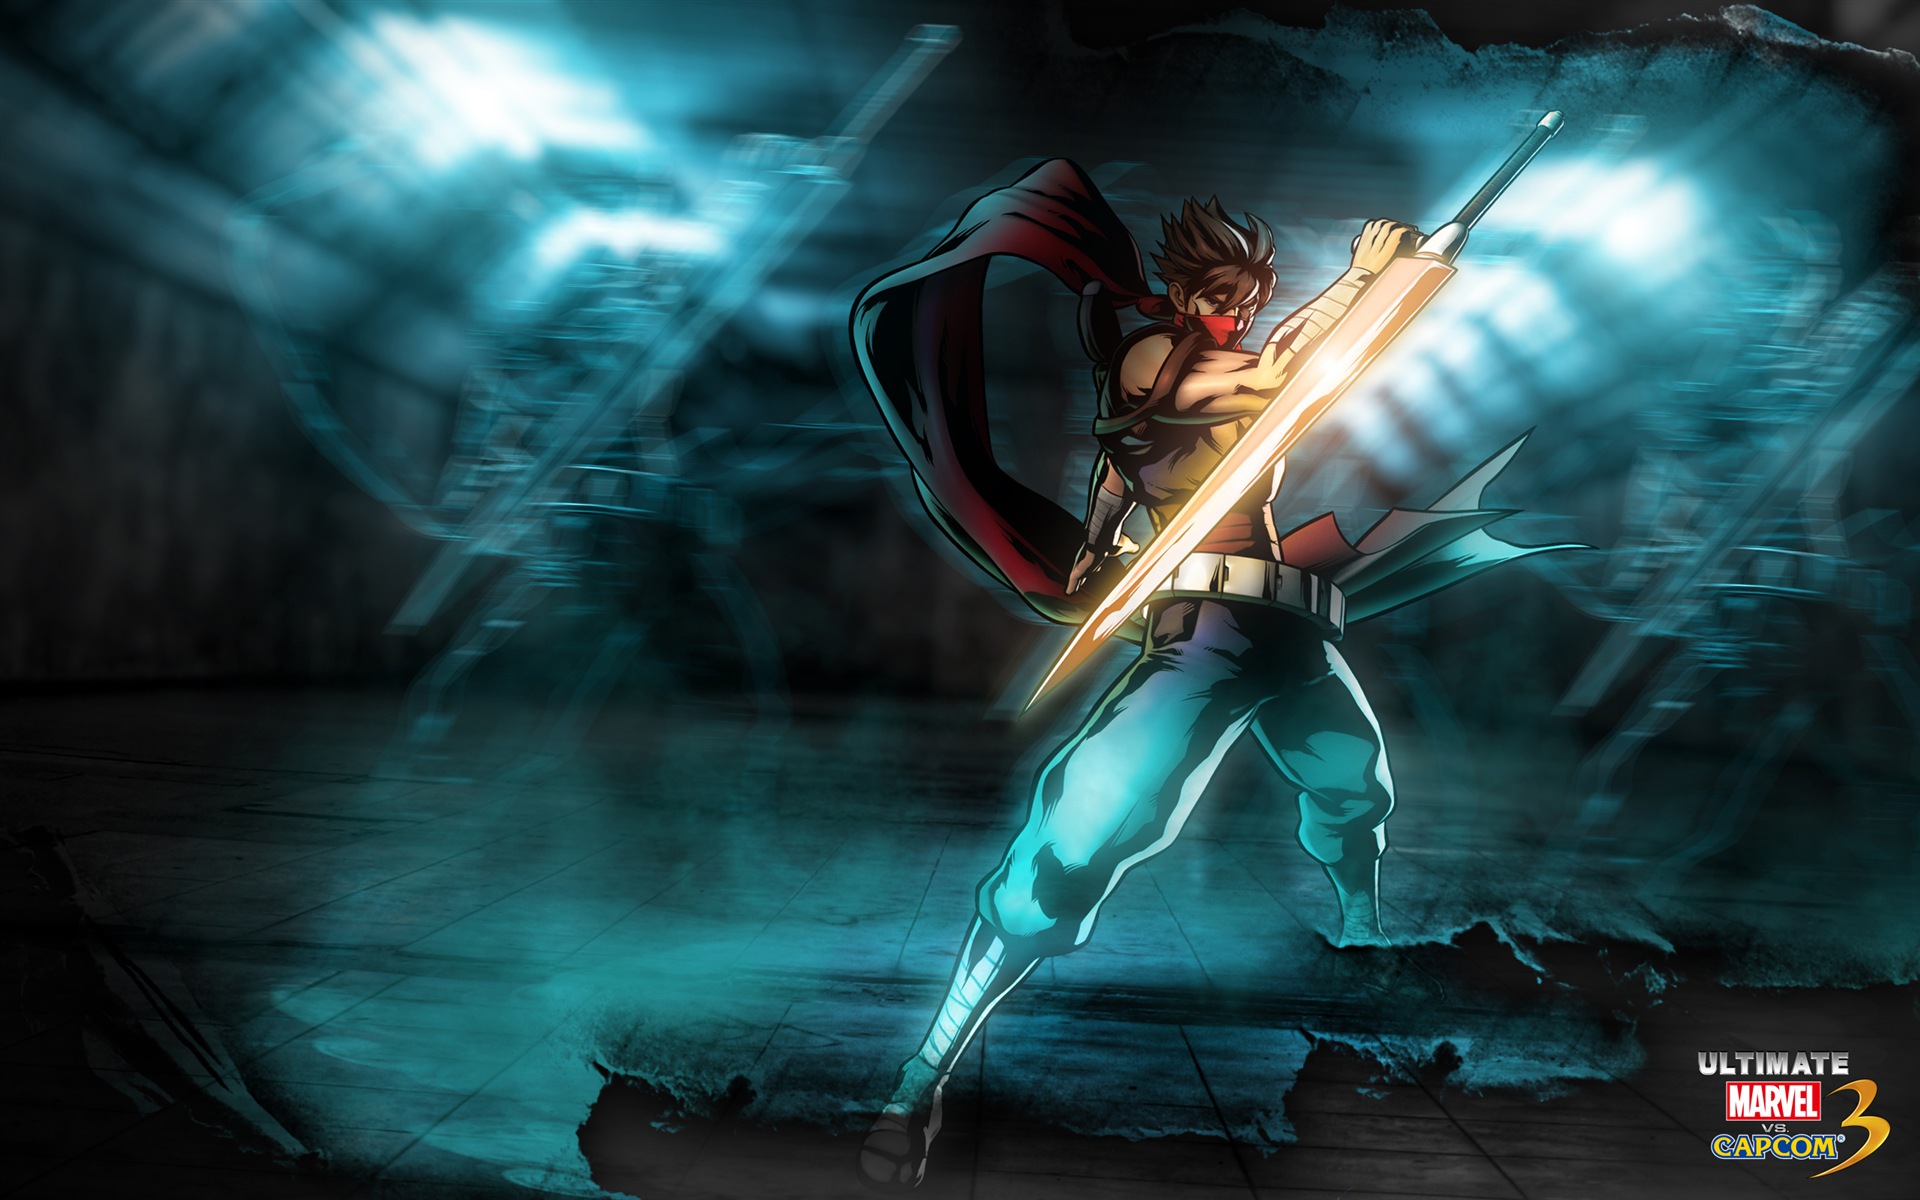 Marvel VS. Capcom 3: Fate of Two Worlds HD game wallpapers #23 - 1920x1200